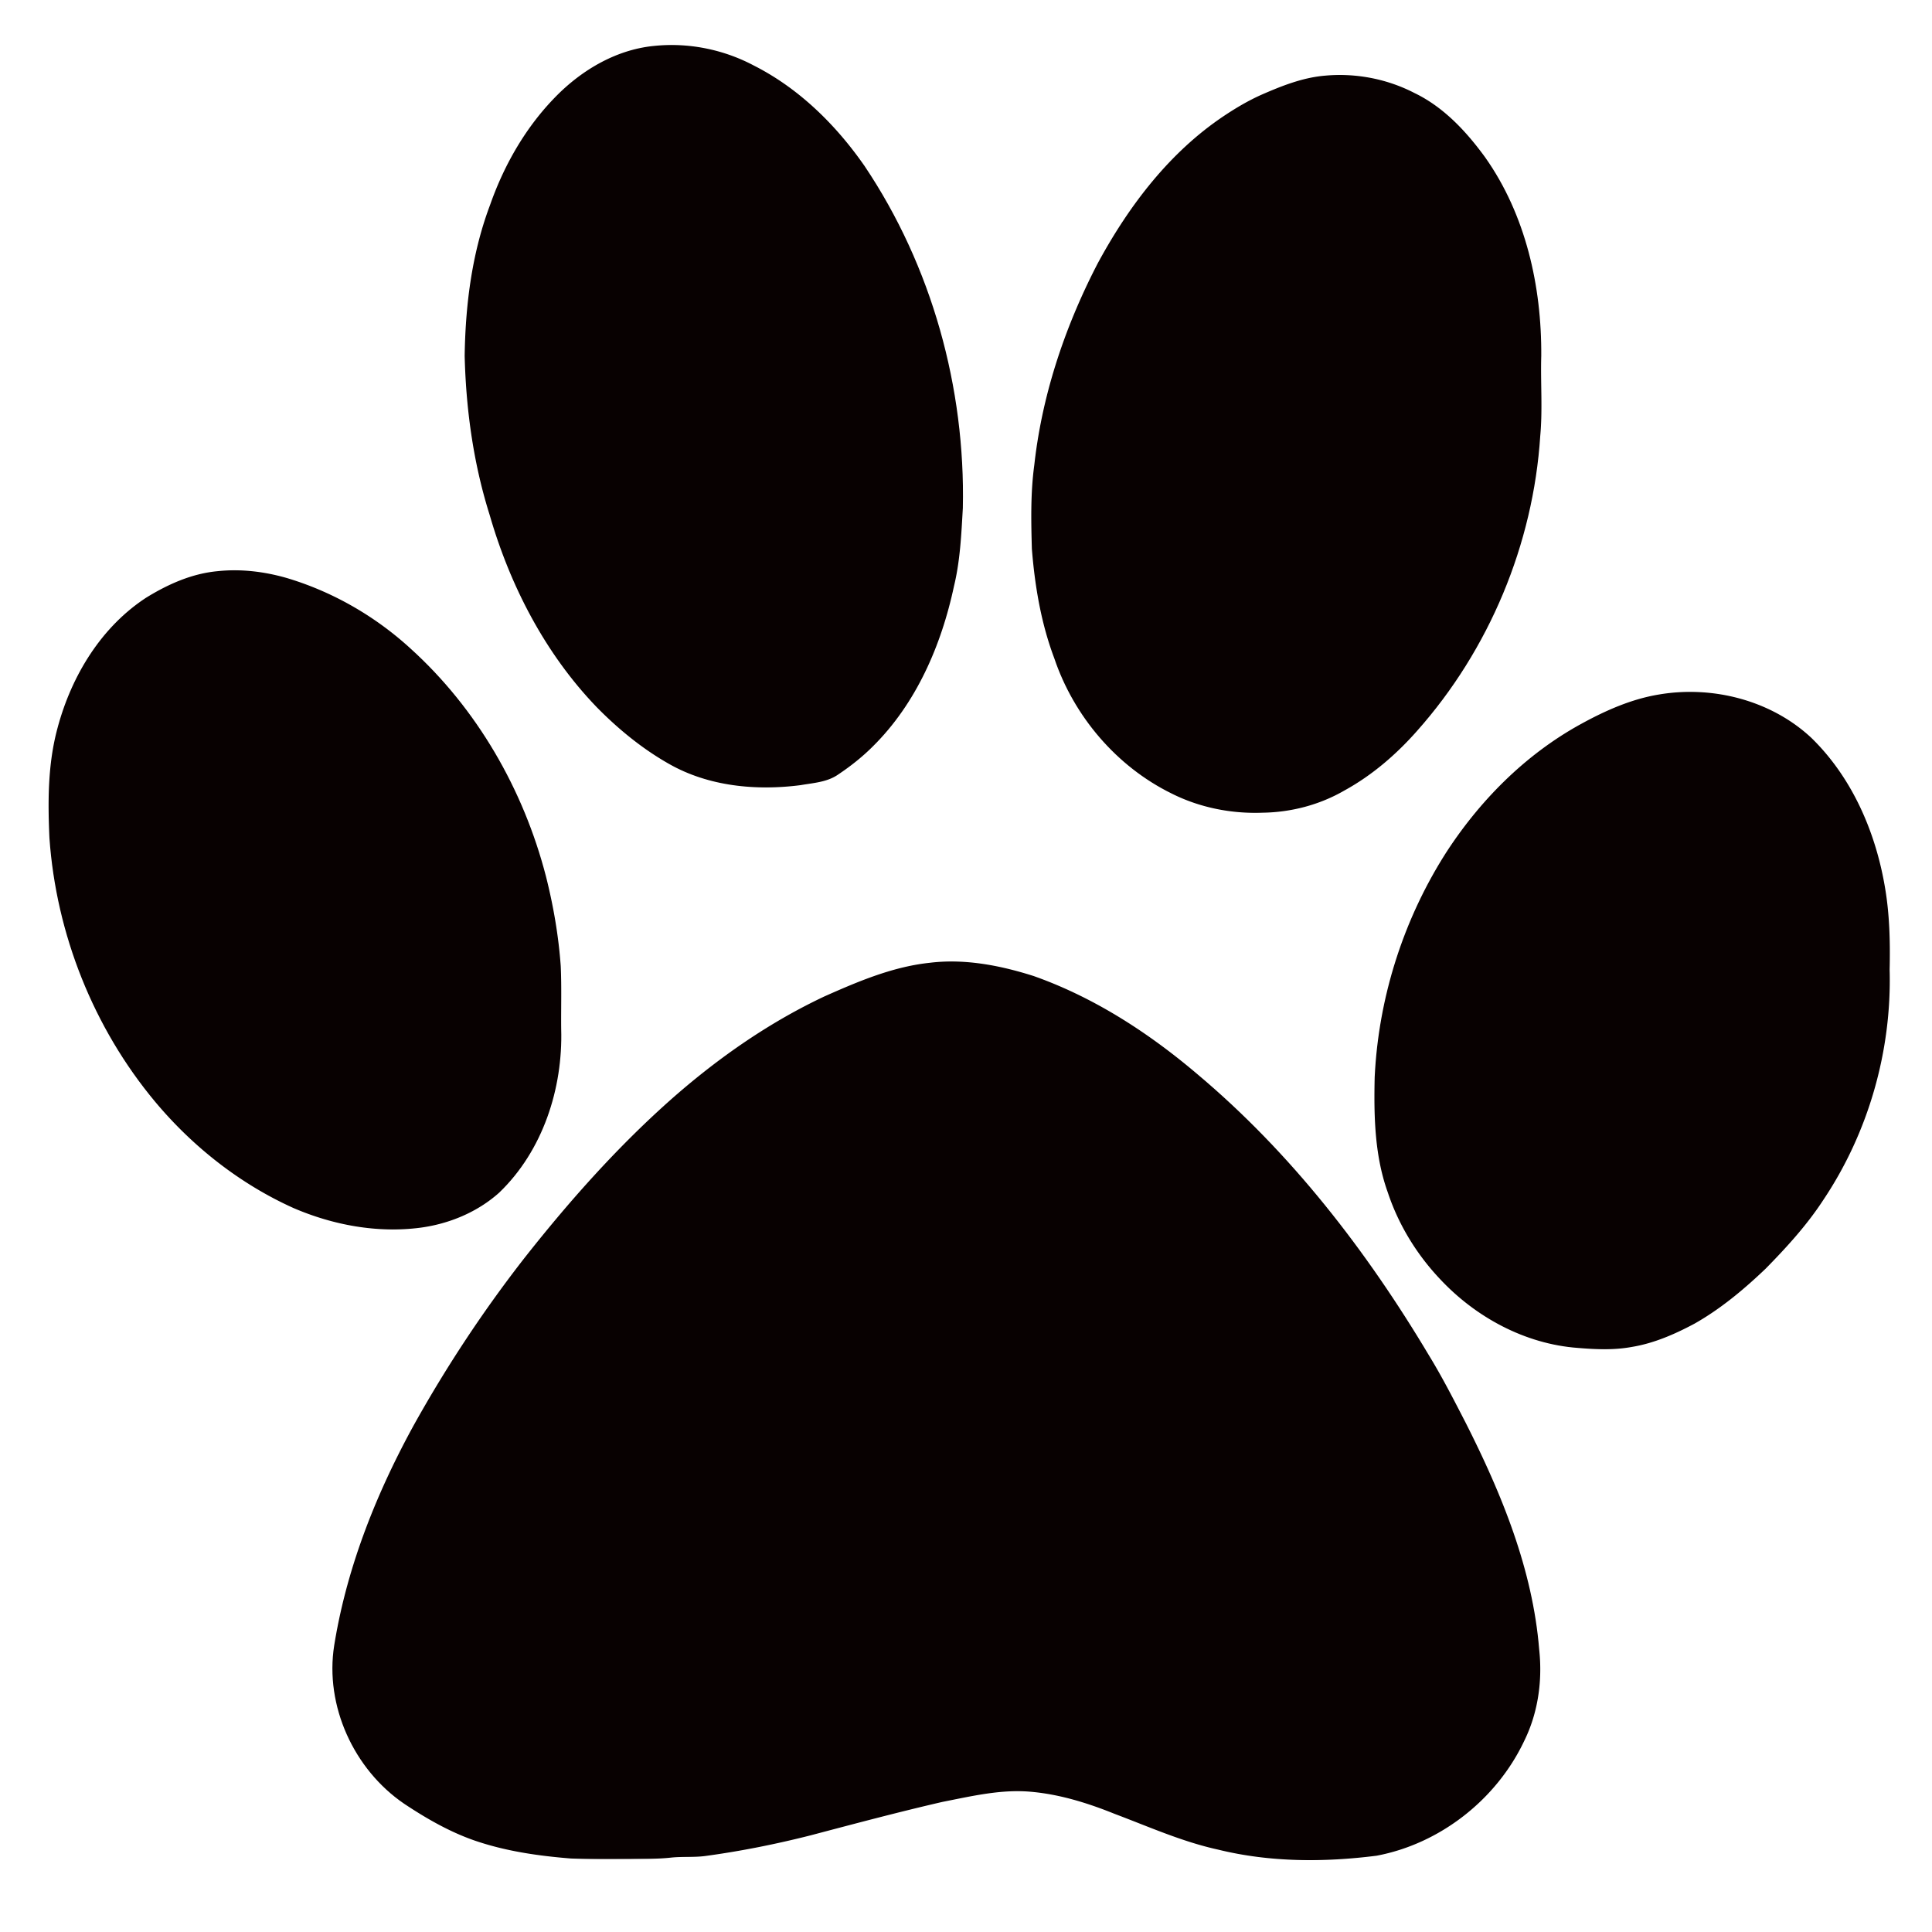 Panther Paw Prints - ClipArt 